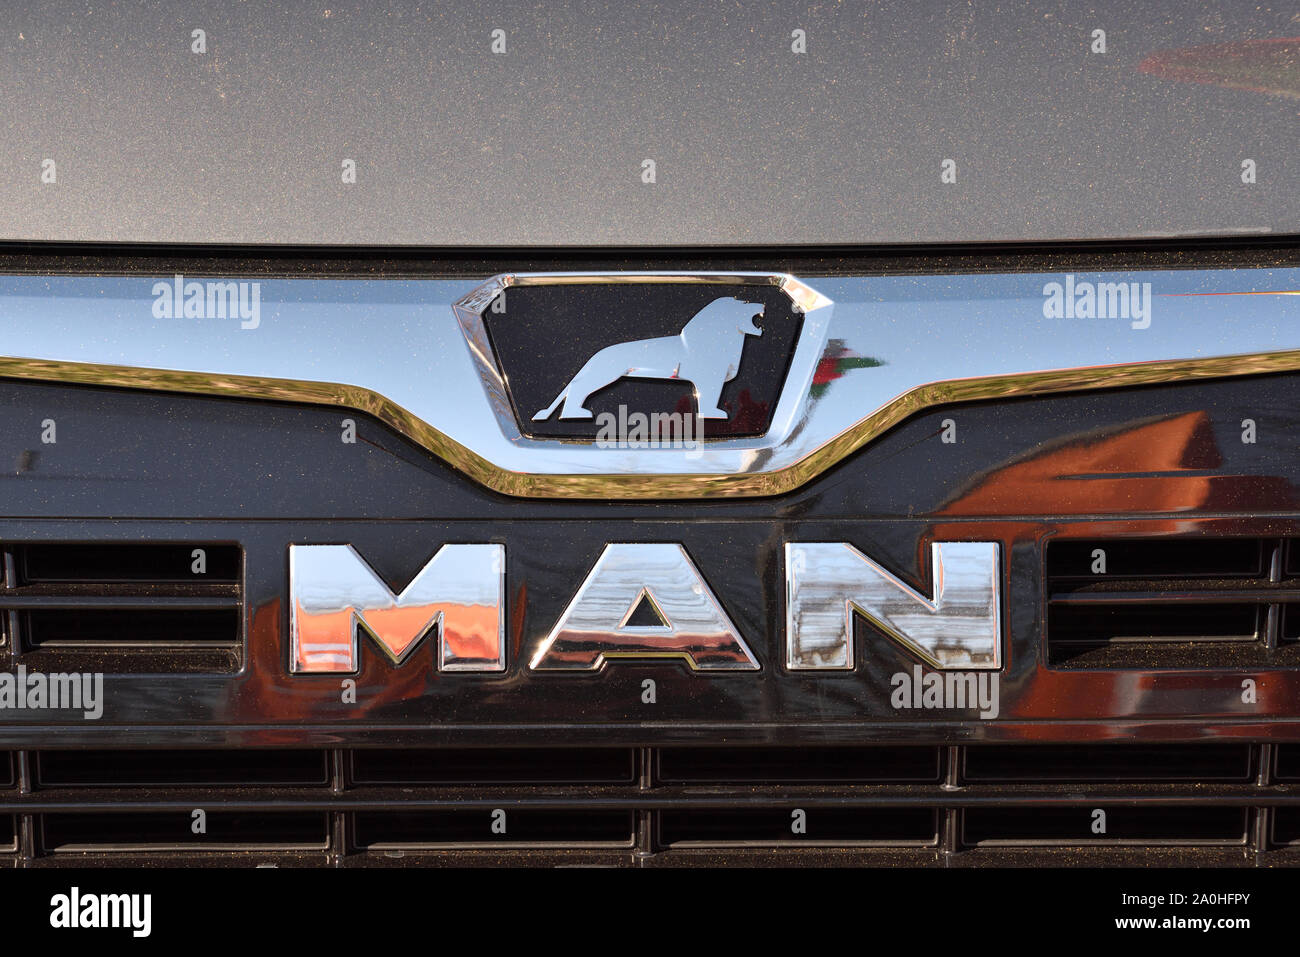 Kaunas, Lithuania - April 04:MAN logotype on a truck in Kaunas on April 04, 2019.  MAN AG is a German mechanical engineering company Stock Photo